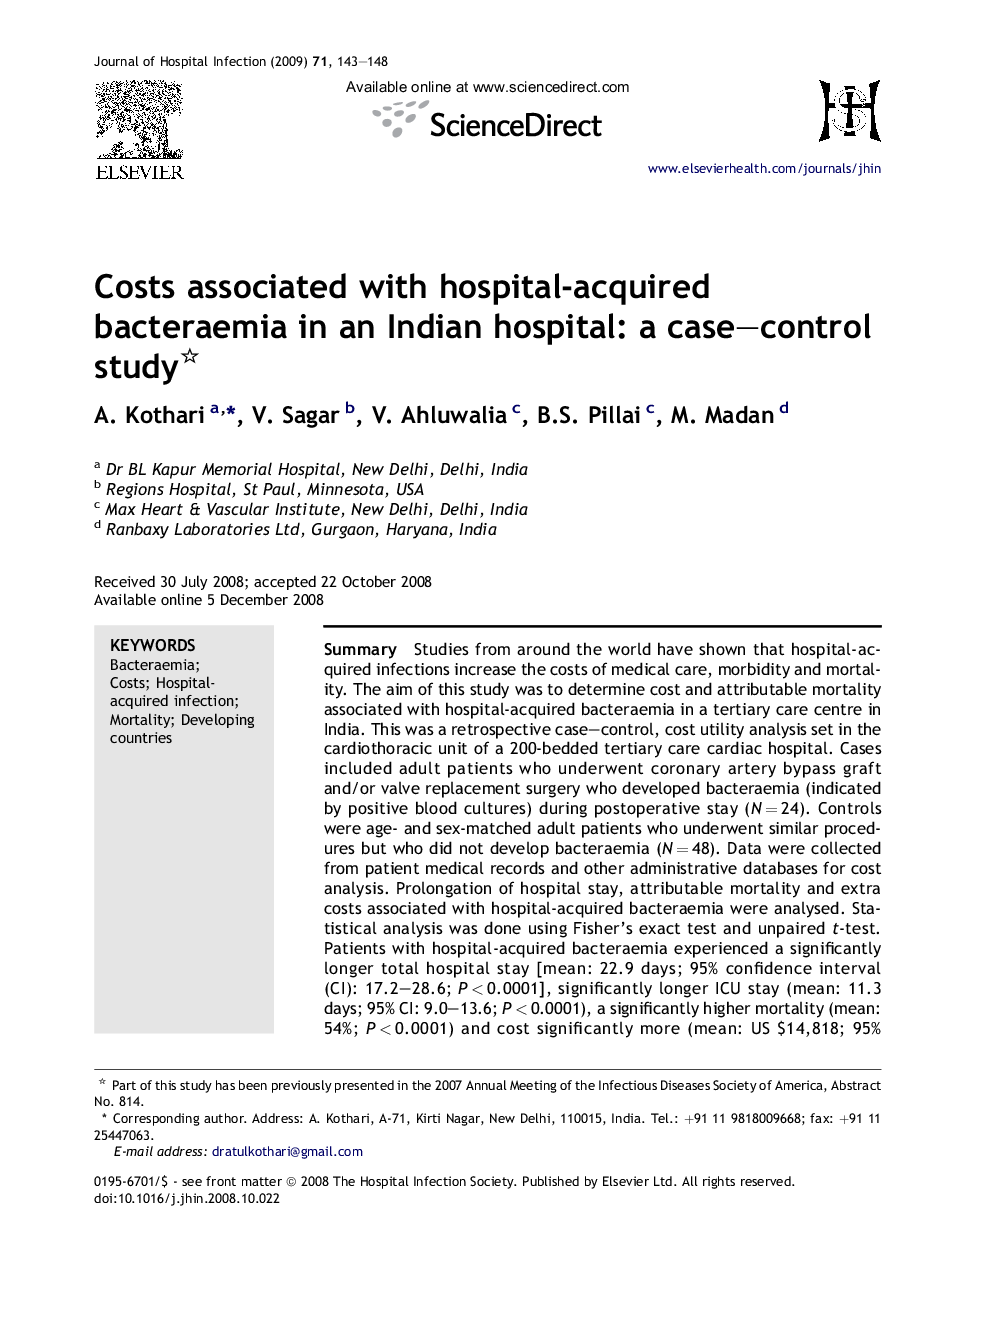 Costs associated with hospital-acquired bacteraemia in an Indian hospital: a case–control study 